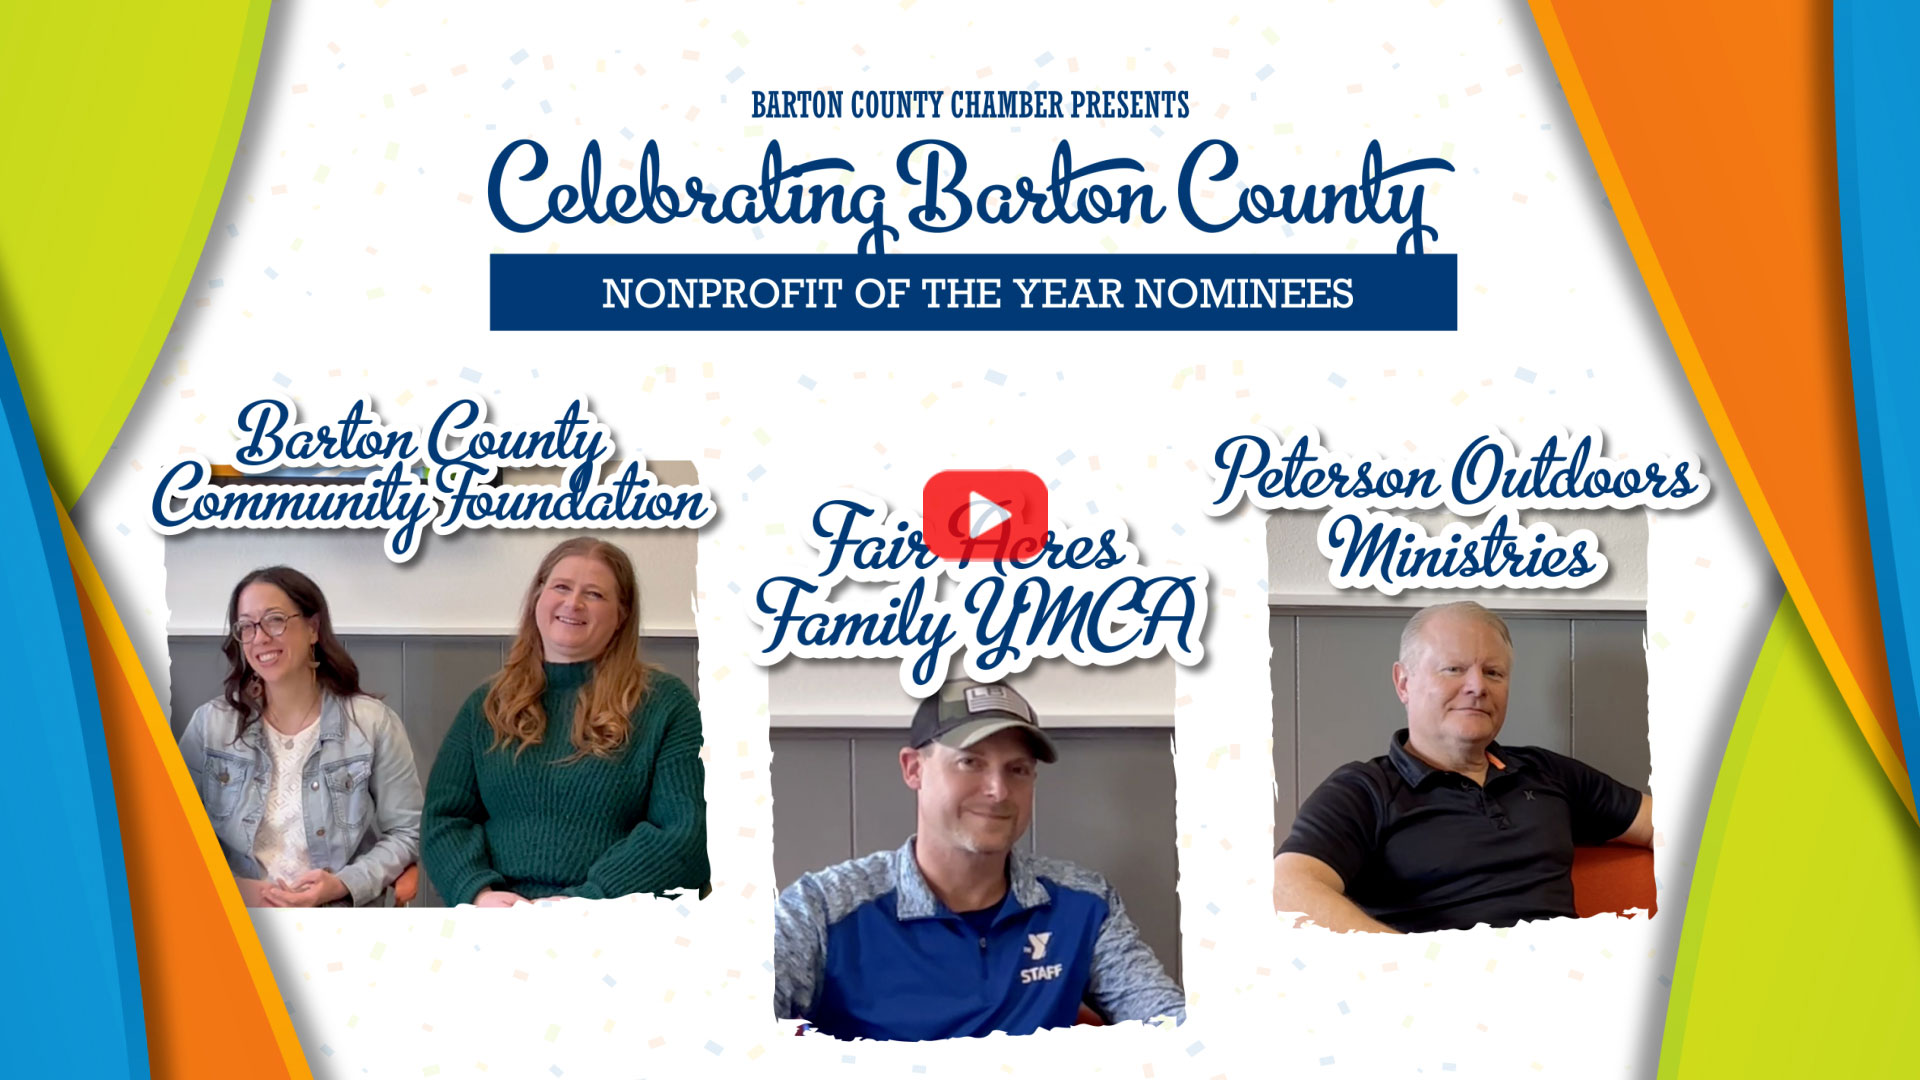 Barton County Chamber Best Of Barton County Awards - Non For Profit